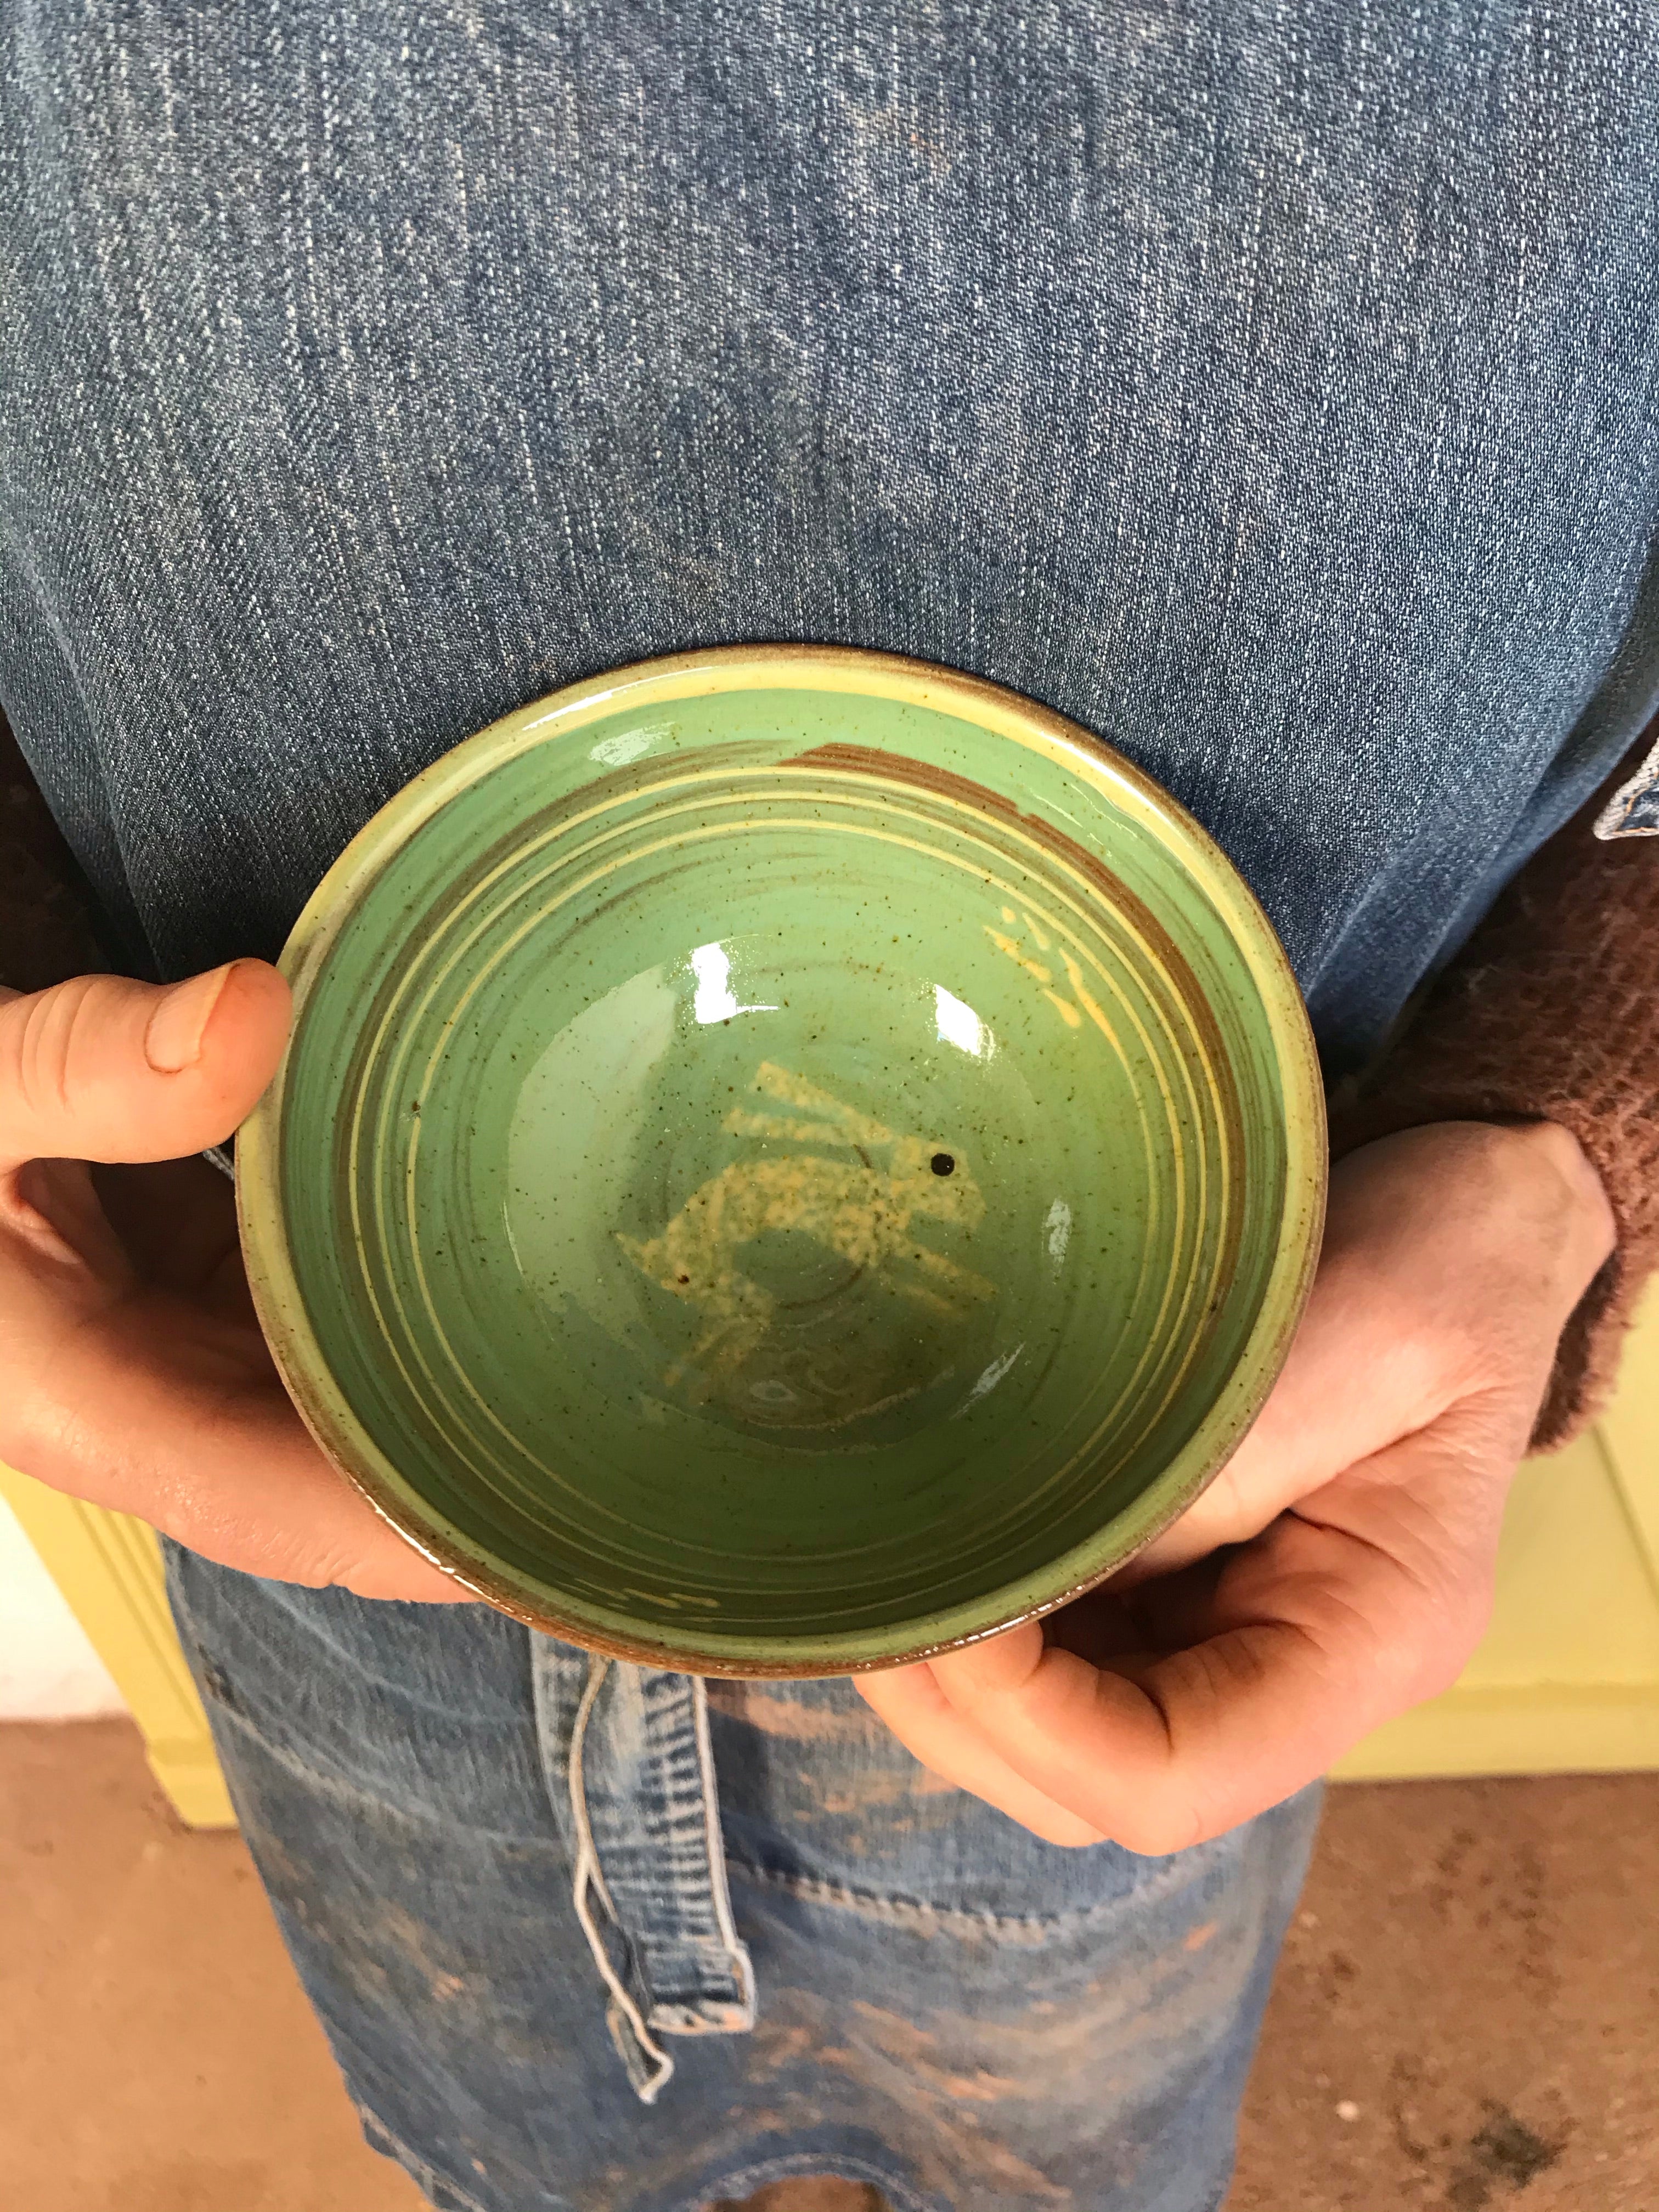 Turquoise Hare Bowl